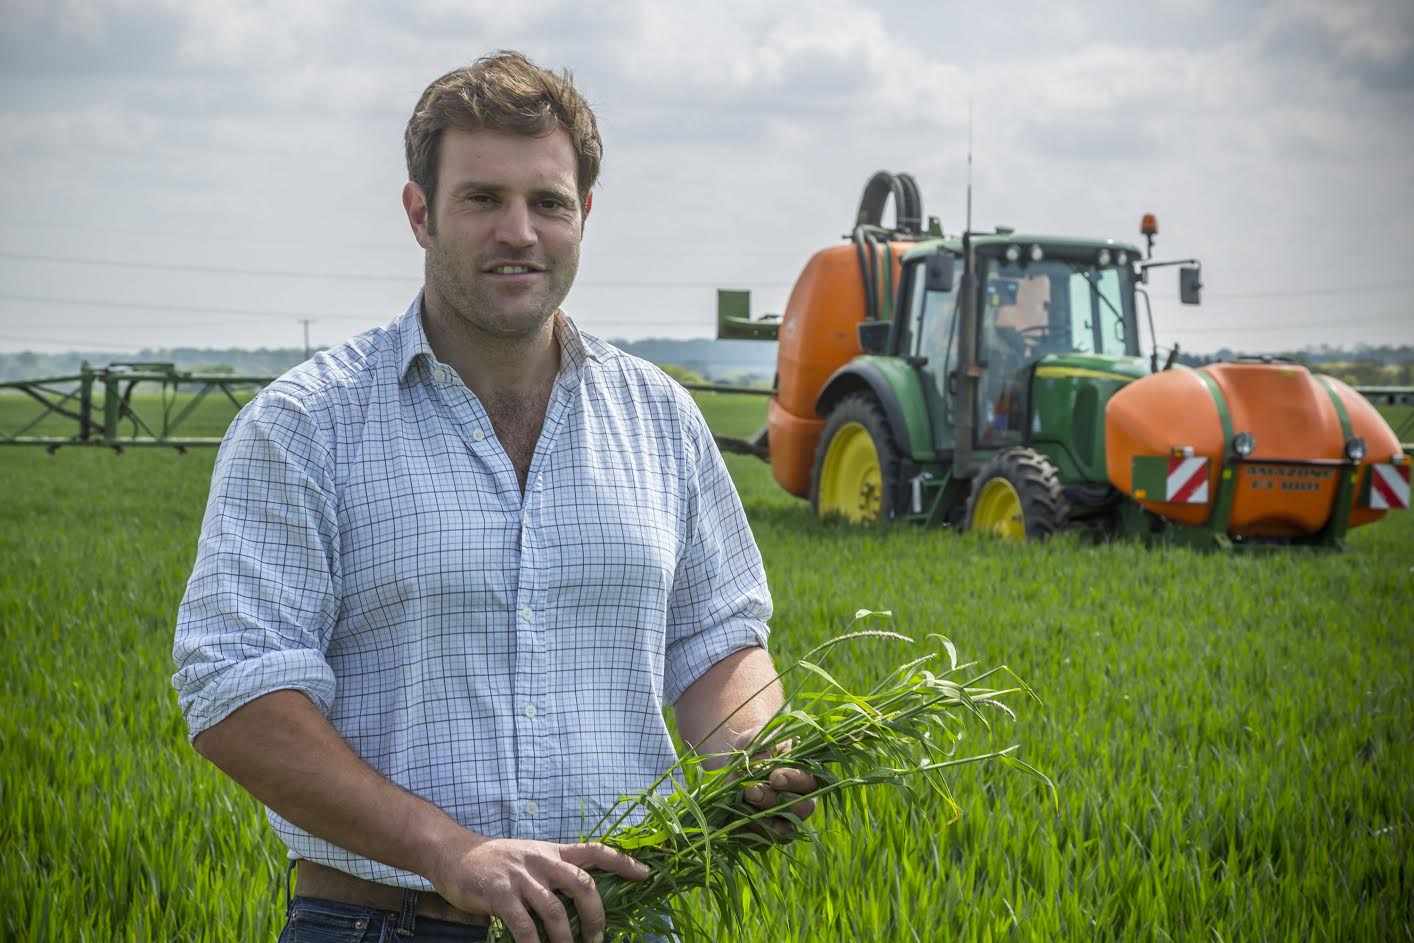 Rick Davies farms over 400 hectares of arable cropping near Olney in Buckinghamshire